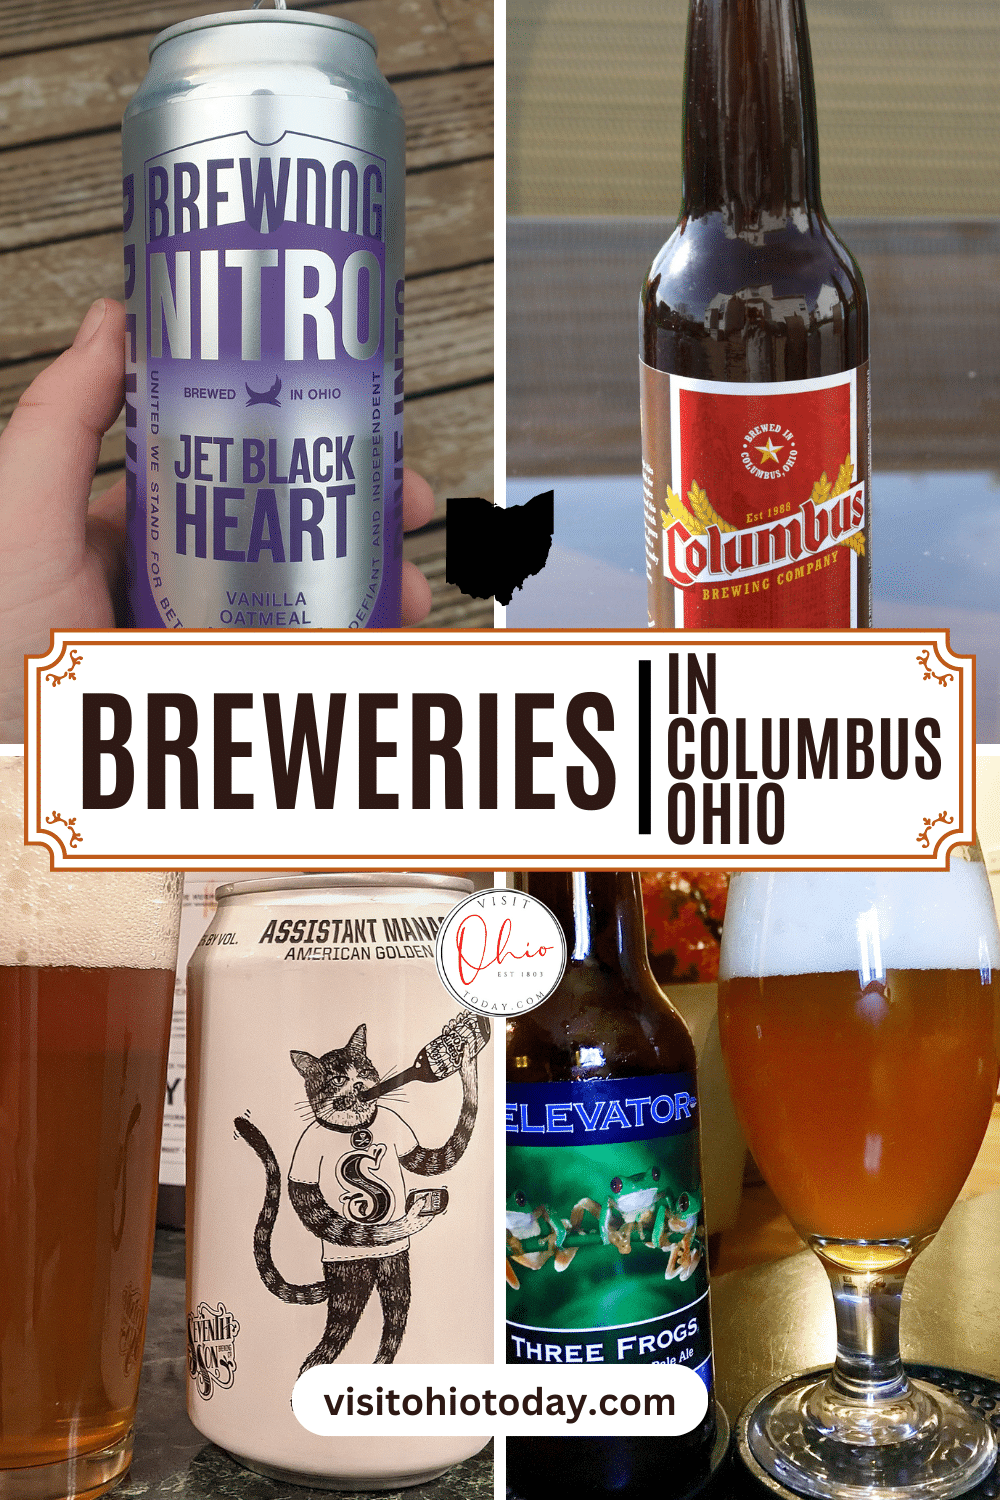 There are many breweries in Columbus Ohio that welcome visitors. These breweries produce some of the best craft beers and ales that you can find not just in Ohio, but throughout the United States.